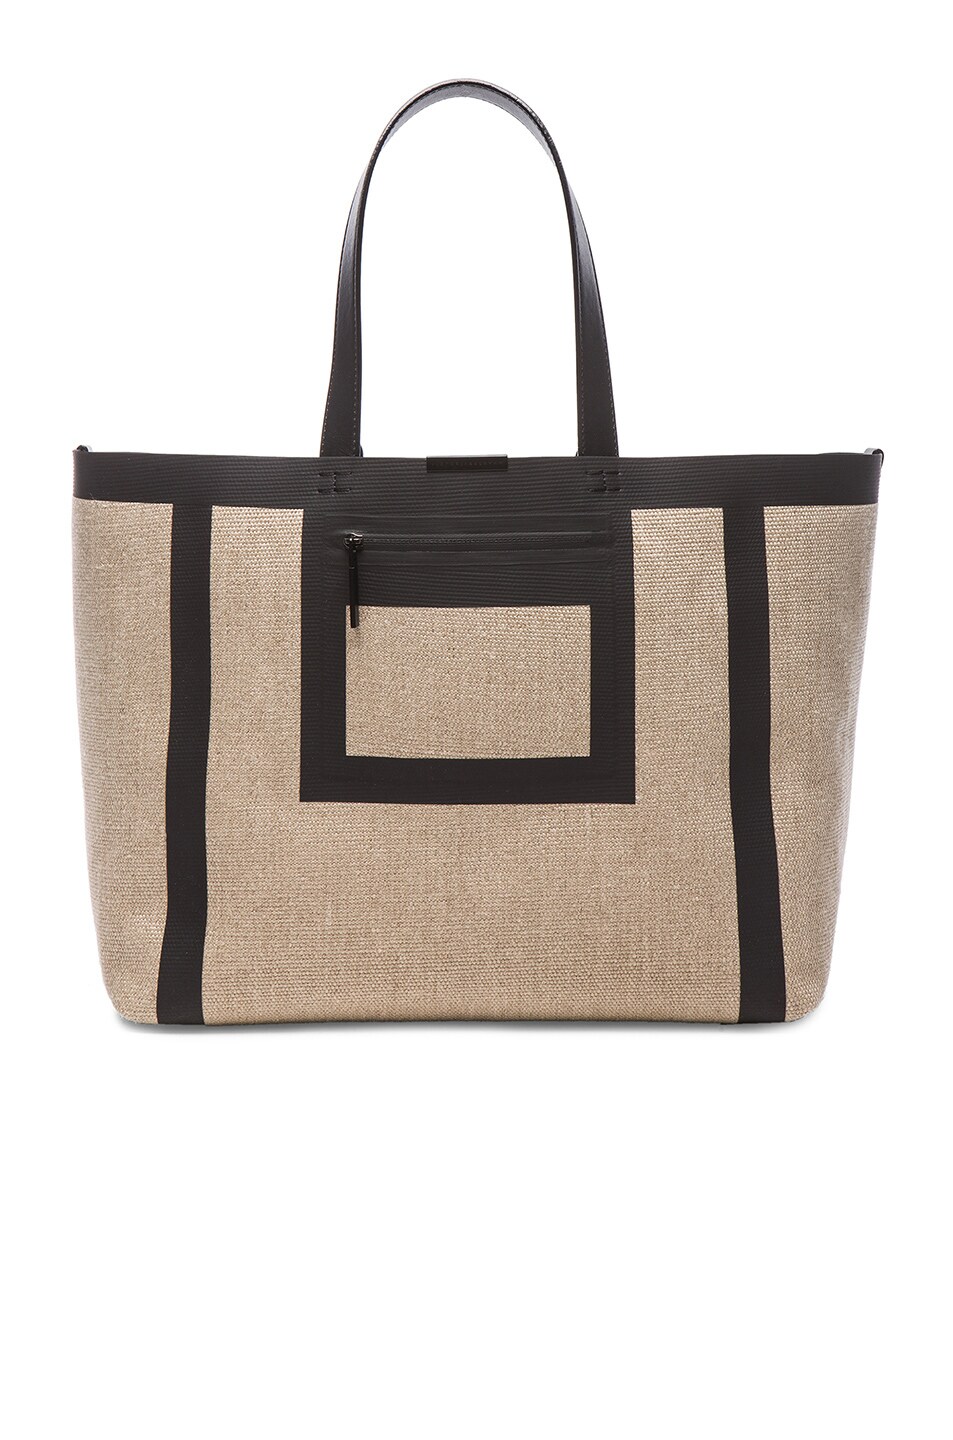 Image 1 of Victoria Beckham Simple Shopper Tote in Black Tape